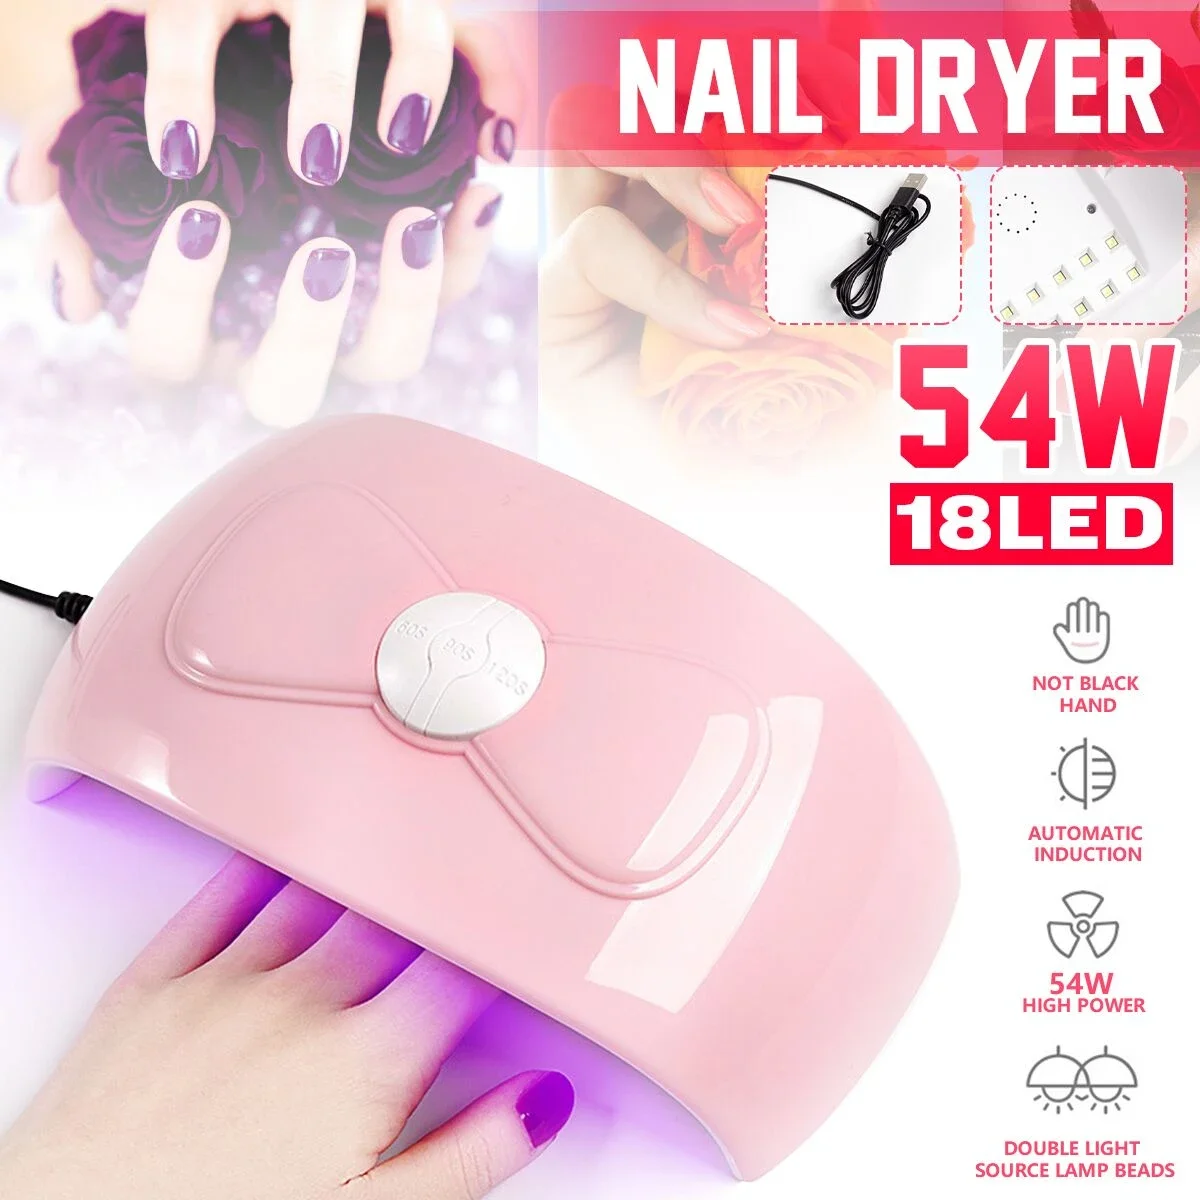 

54W Nail Dryer UV Lamp LED Lamp For Nails With 18 LEDs Dryer Lamp For Curing Gel Polish Auto Sensing Nail Manicure Tool Portable